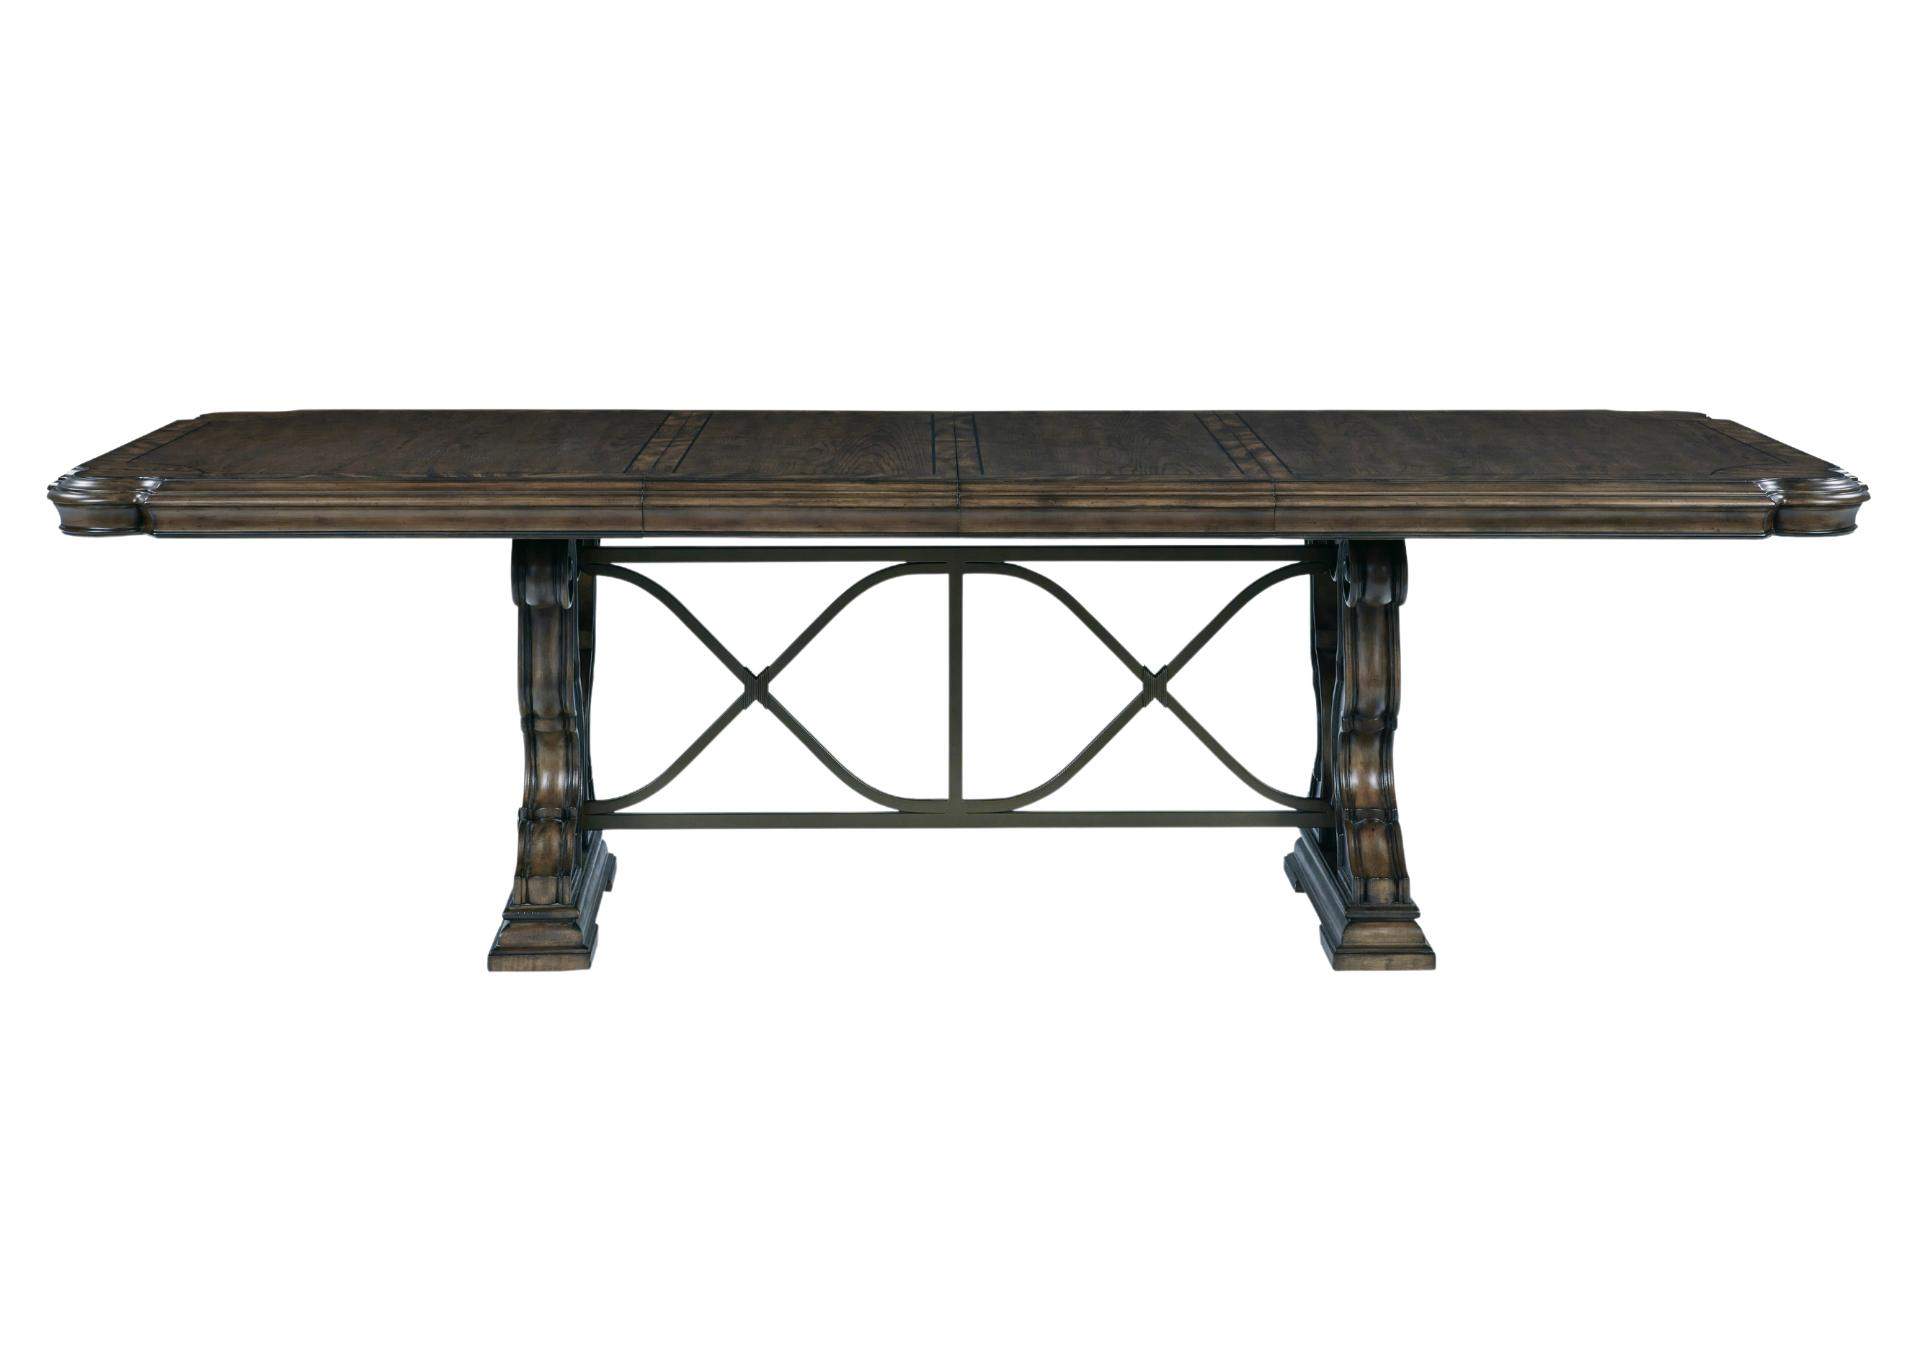 MAYLEE TABLE TOP AND BASE,ASHLEY FURNITURE INC.